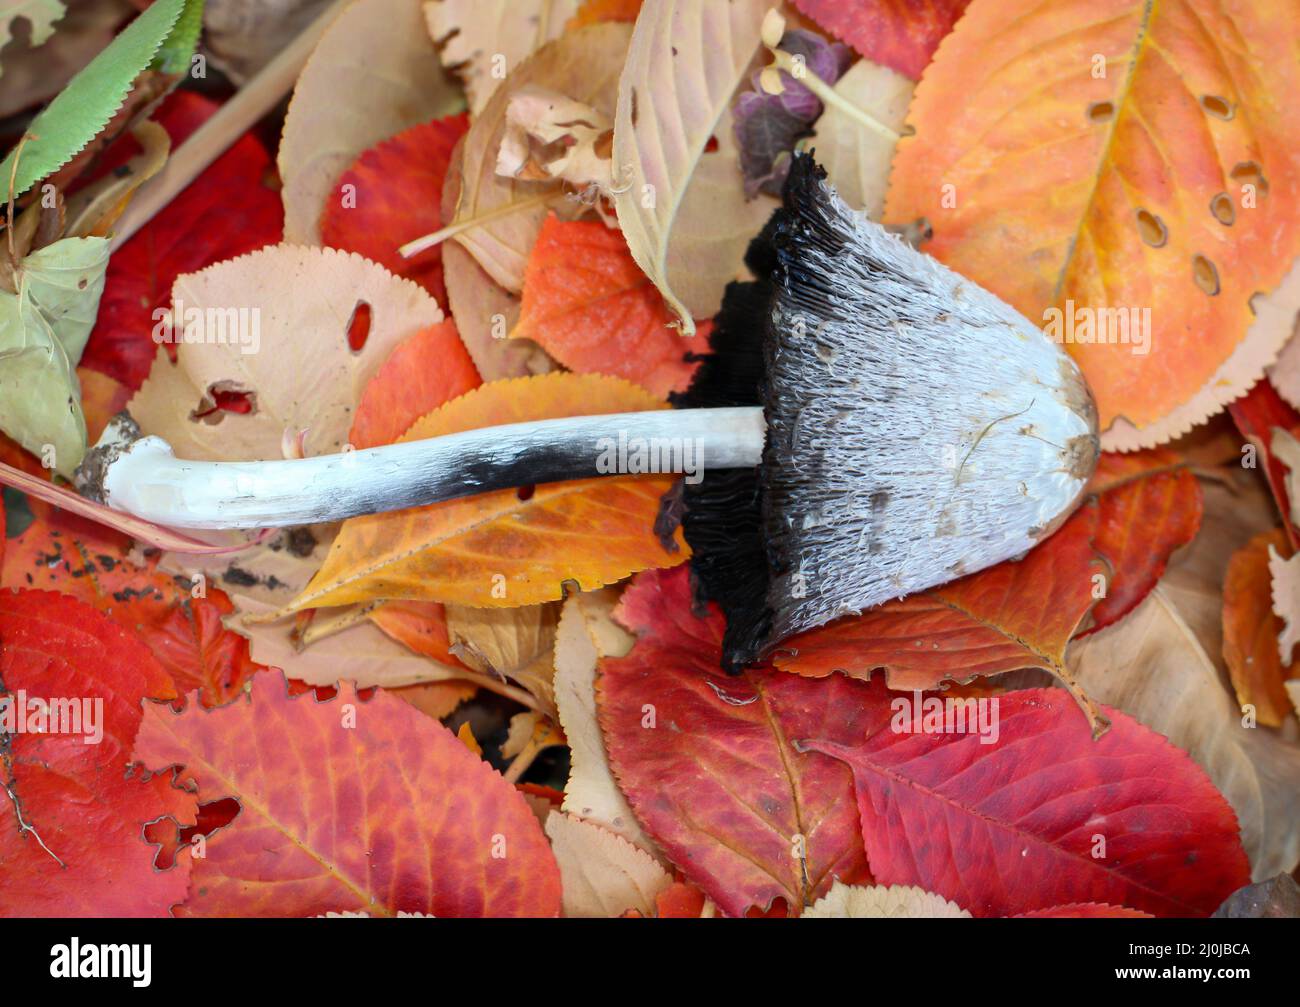 A white black mushroom with a long stem lies on colorful autumn leaves. Stock Photo